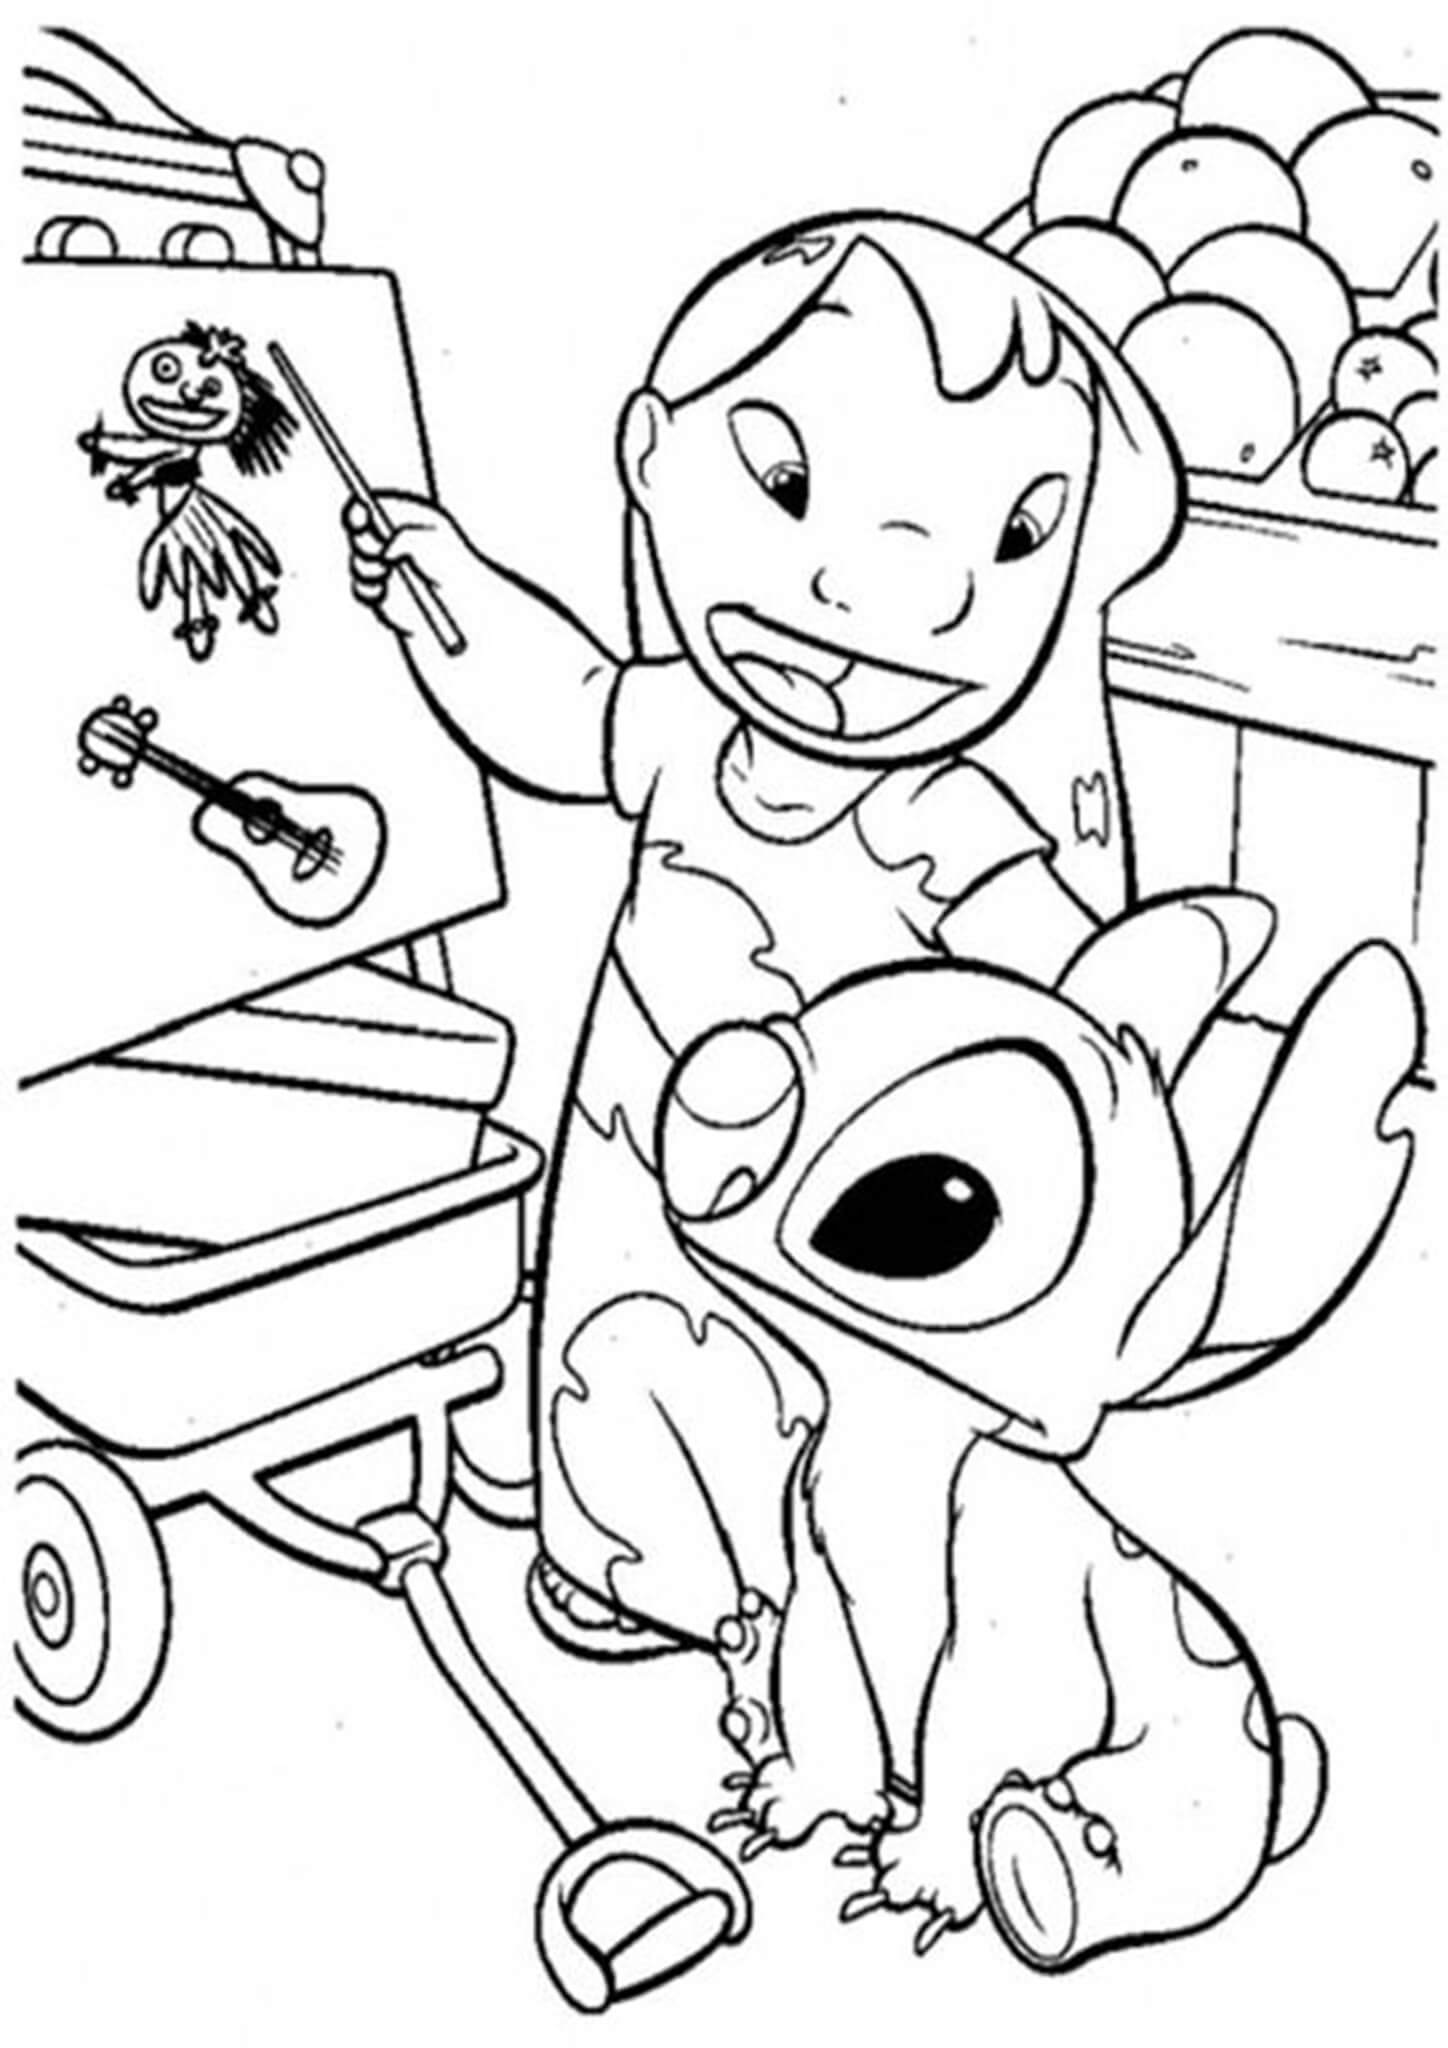 colouring-pages-of-stitch-stitch-coloring-pages-printable-kids-educative-disneyclips